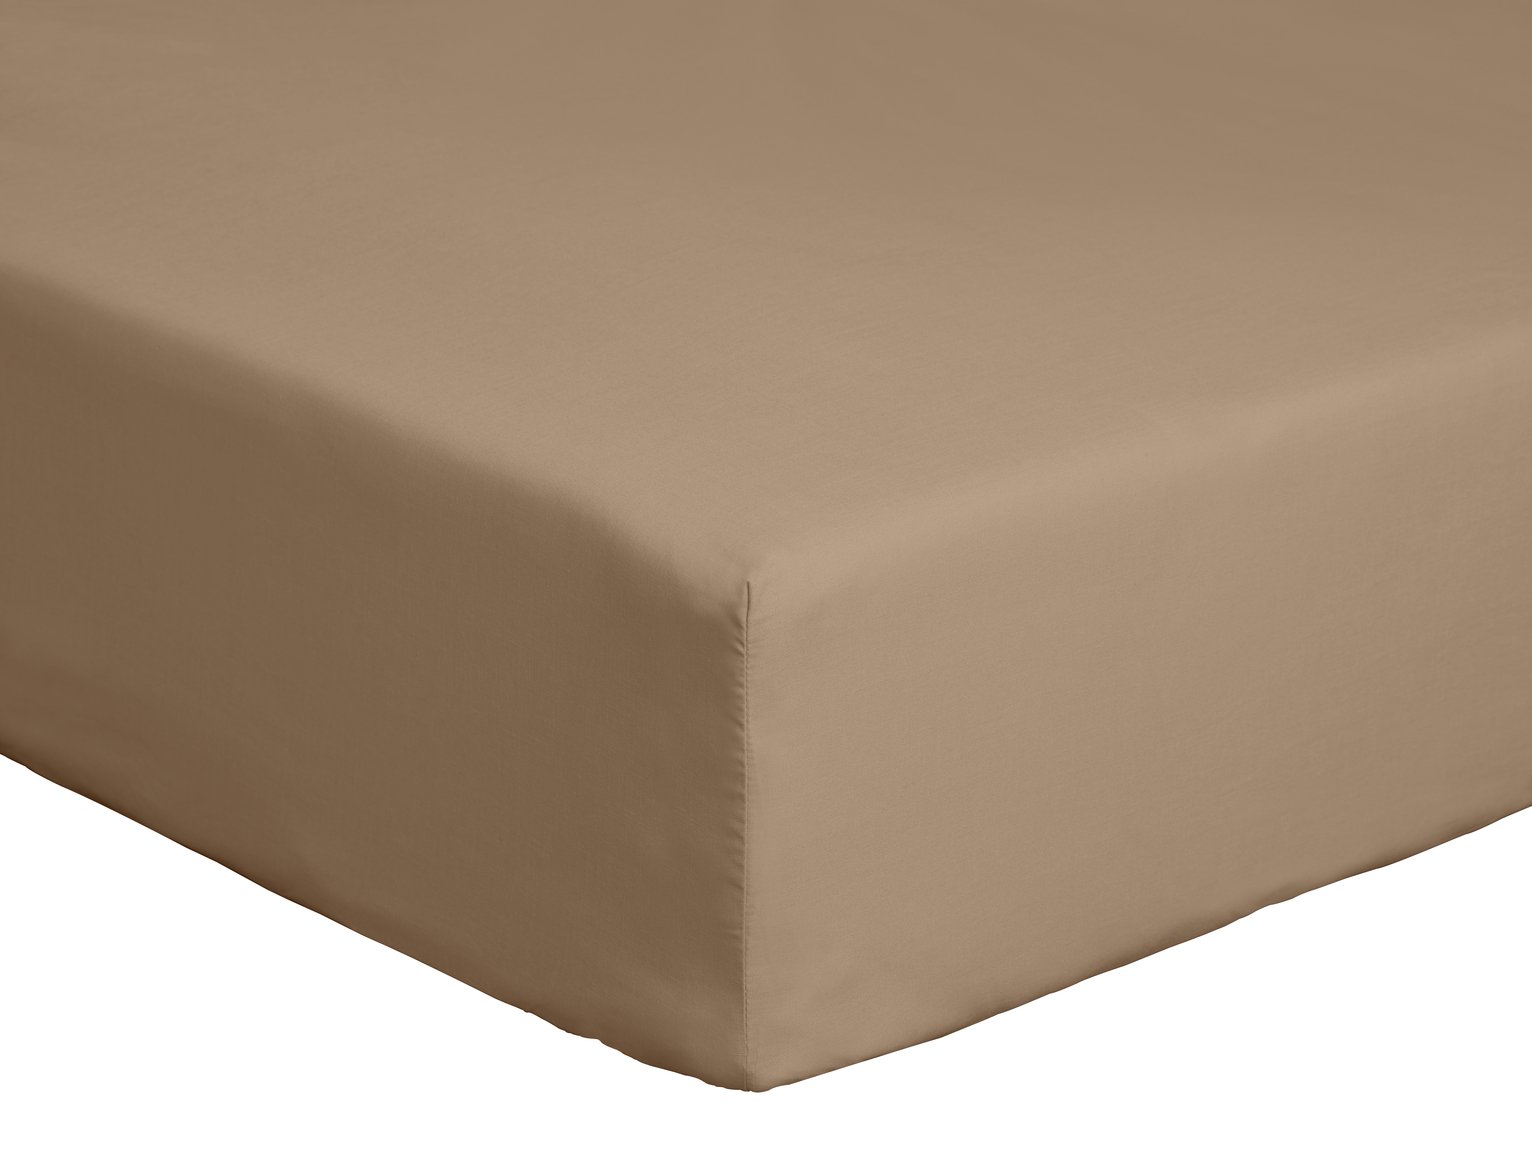 Habitat Cotton Rich 180 TC Taupe Fitted Sheet - Double